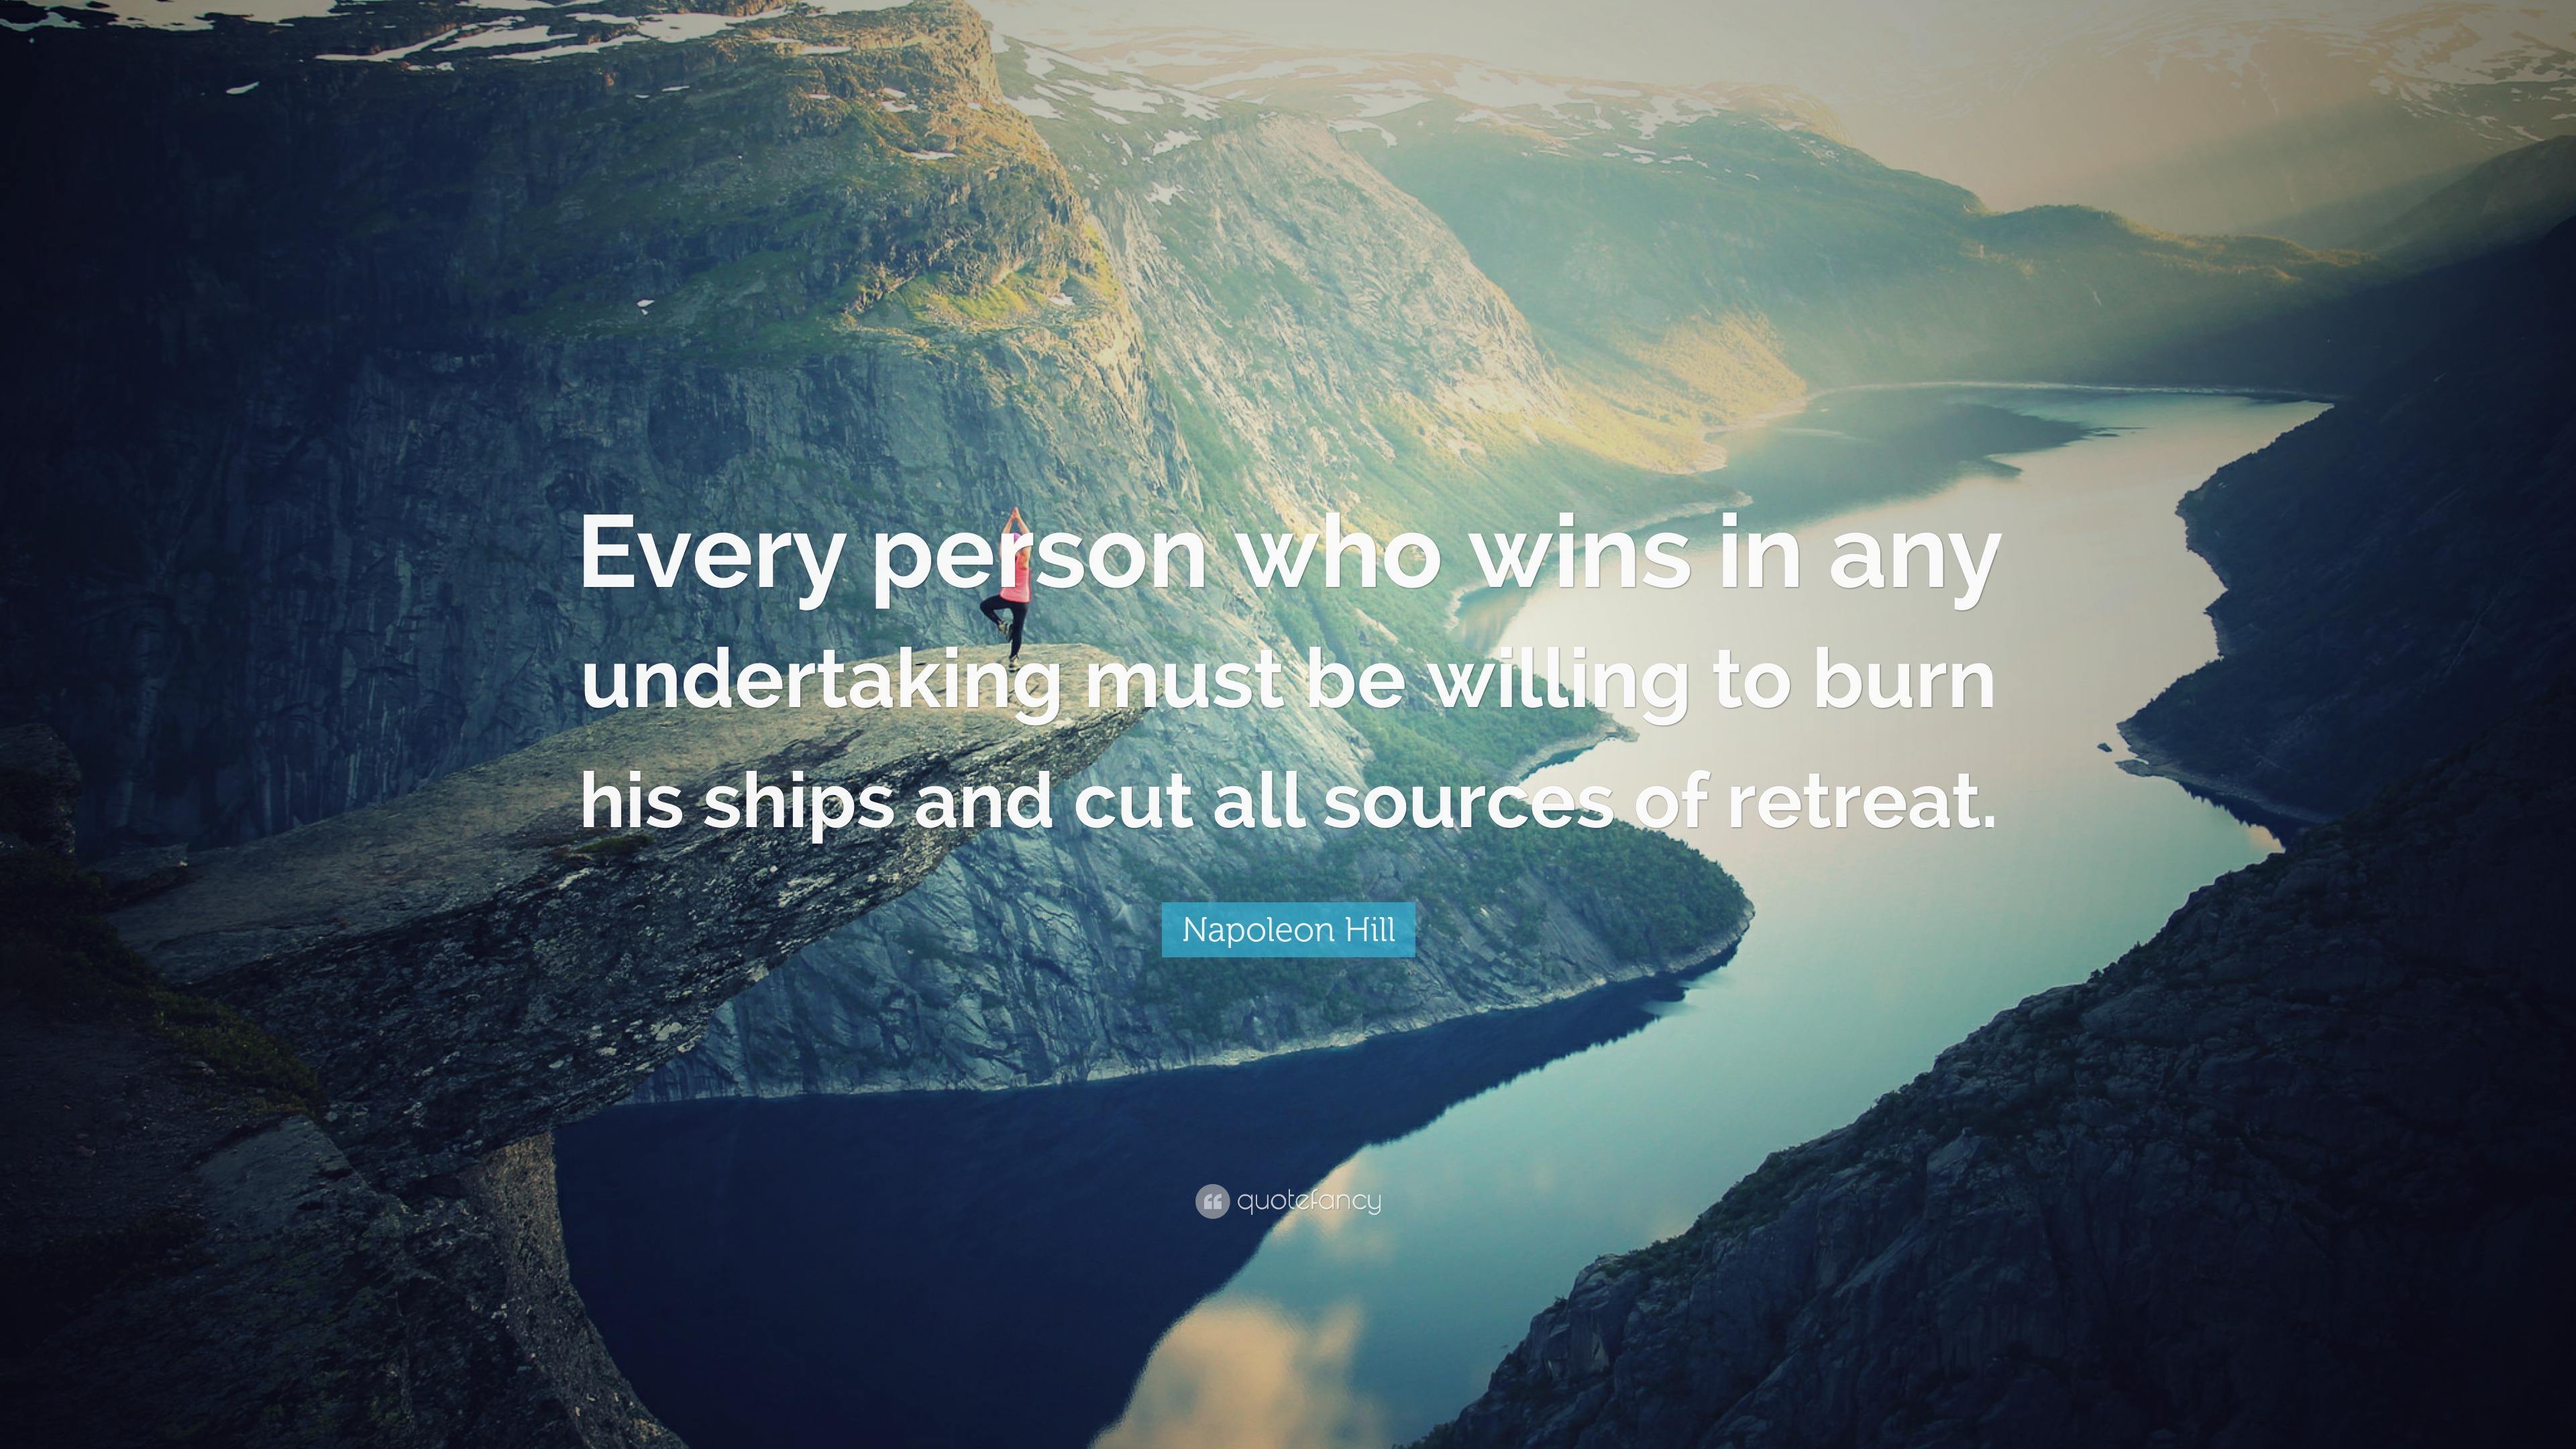 Napoleon Hill Quote: “Every person who wins in any undertaking must be